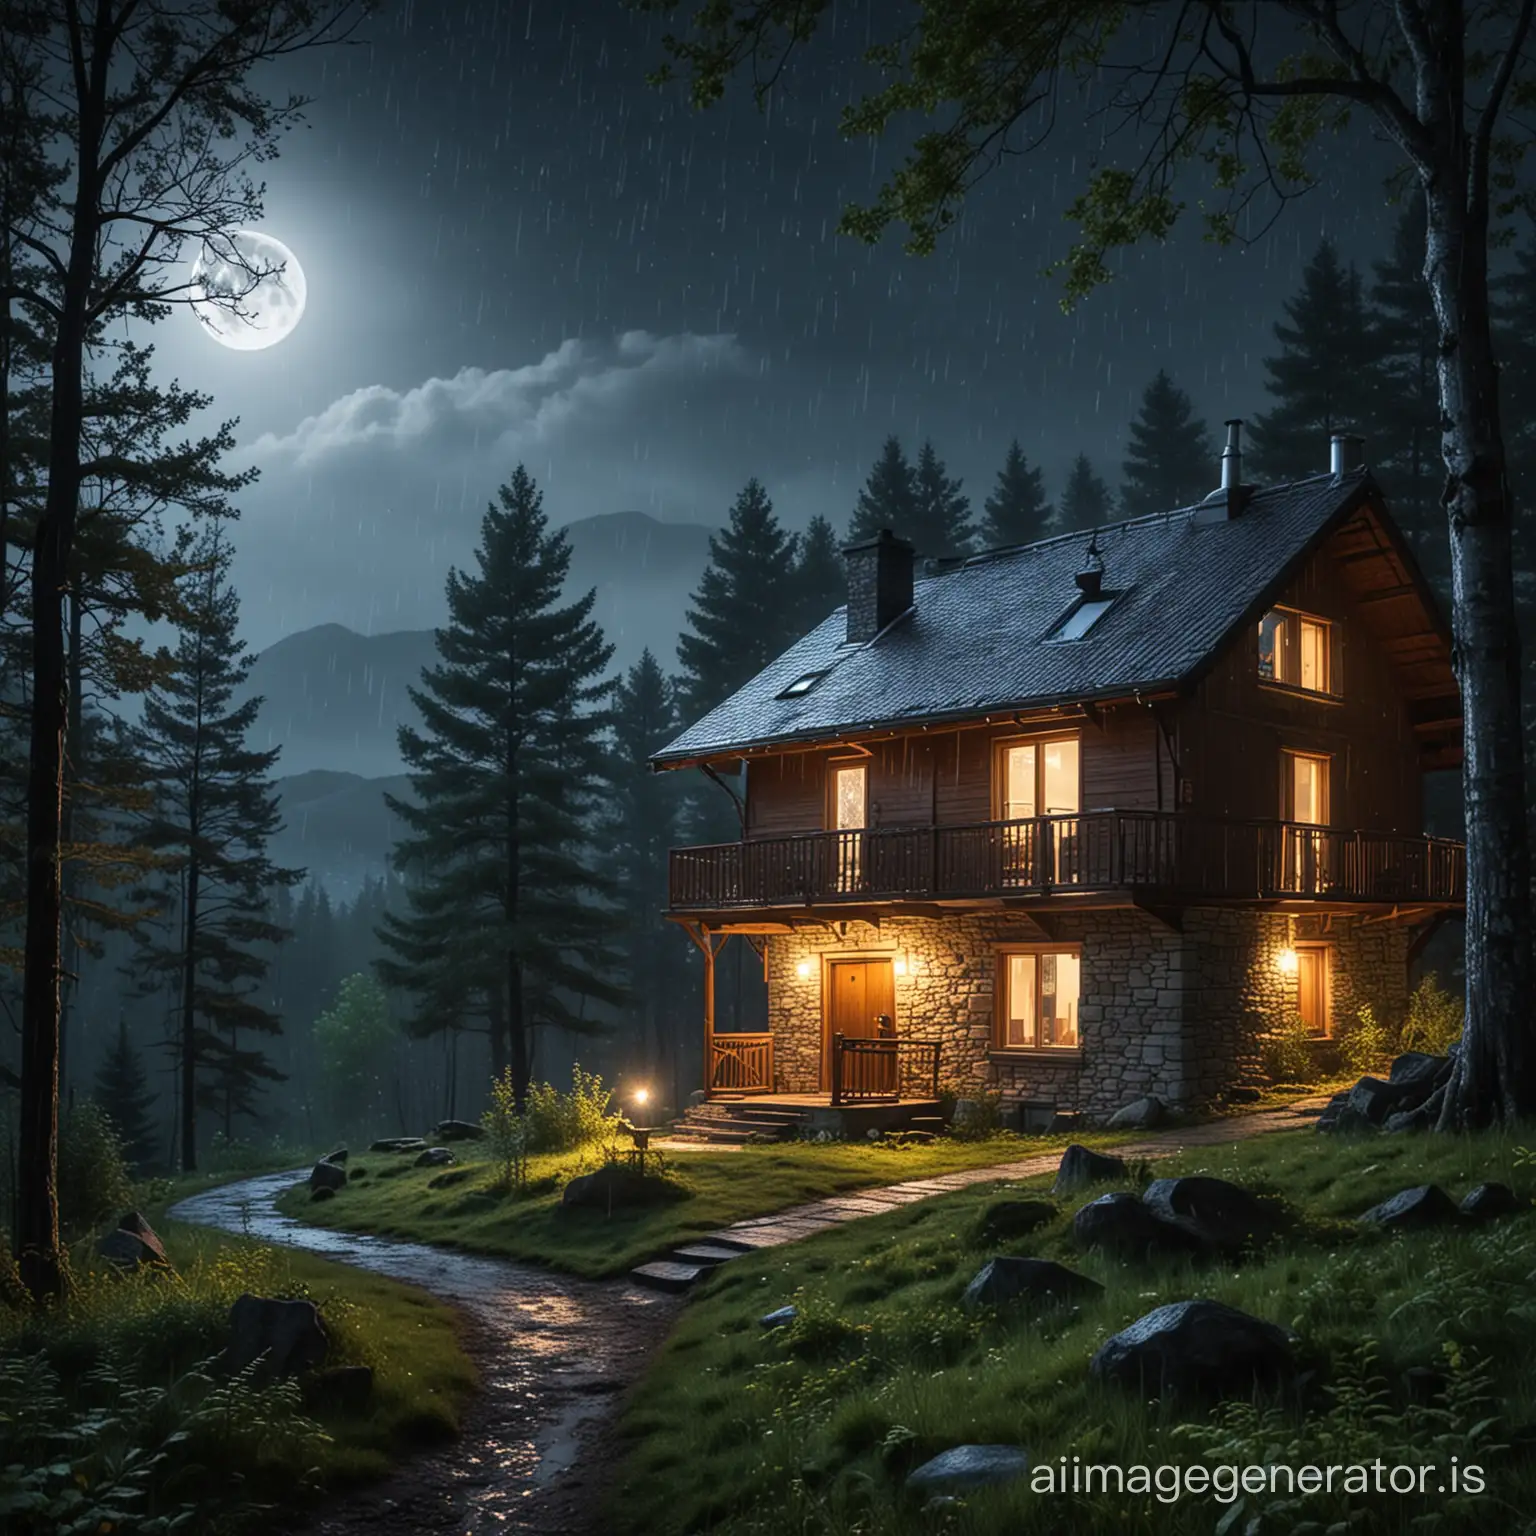 Night forest with light rain. Beautiful forest house with a chimney. Full moon illuminating the mountains.